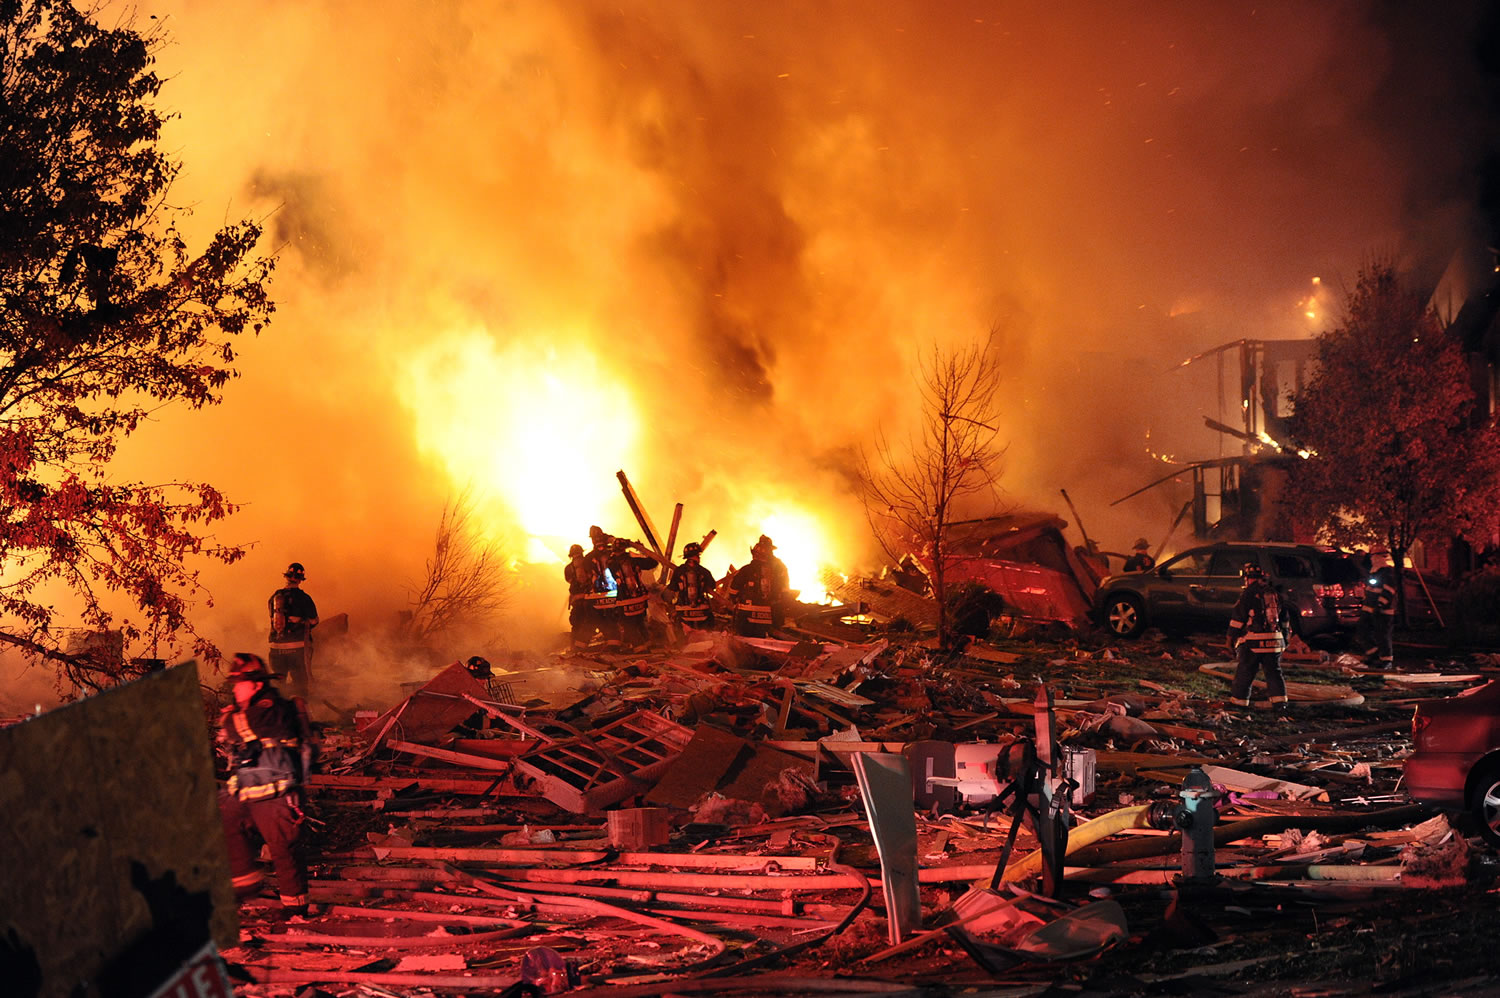 Authorities say a loud explosion has leveled a home in Indianapolis and set four others ablaze in a neighborhood, causing several injuries. Capt. Rita Burris with the Indiana Fire Department told The Associated Press that firefighters are still working to put out the flames after the explosion around 11 p.m. Saturday Nov. 10, 2012.